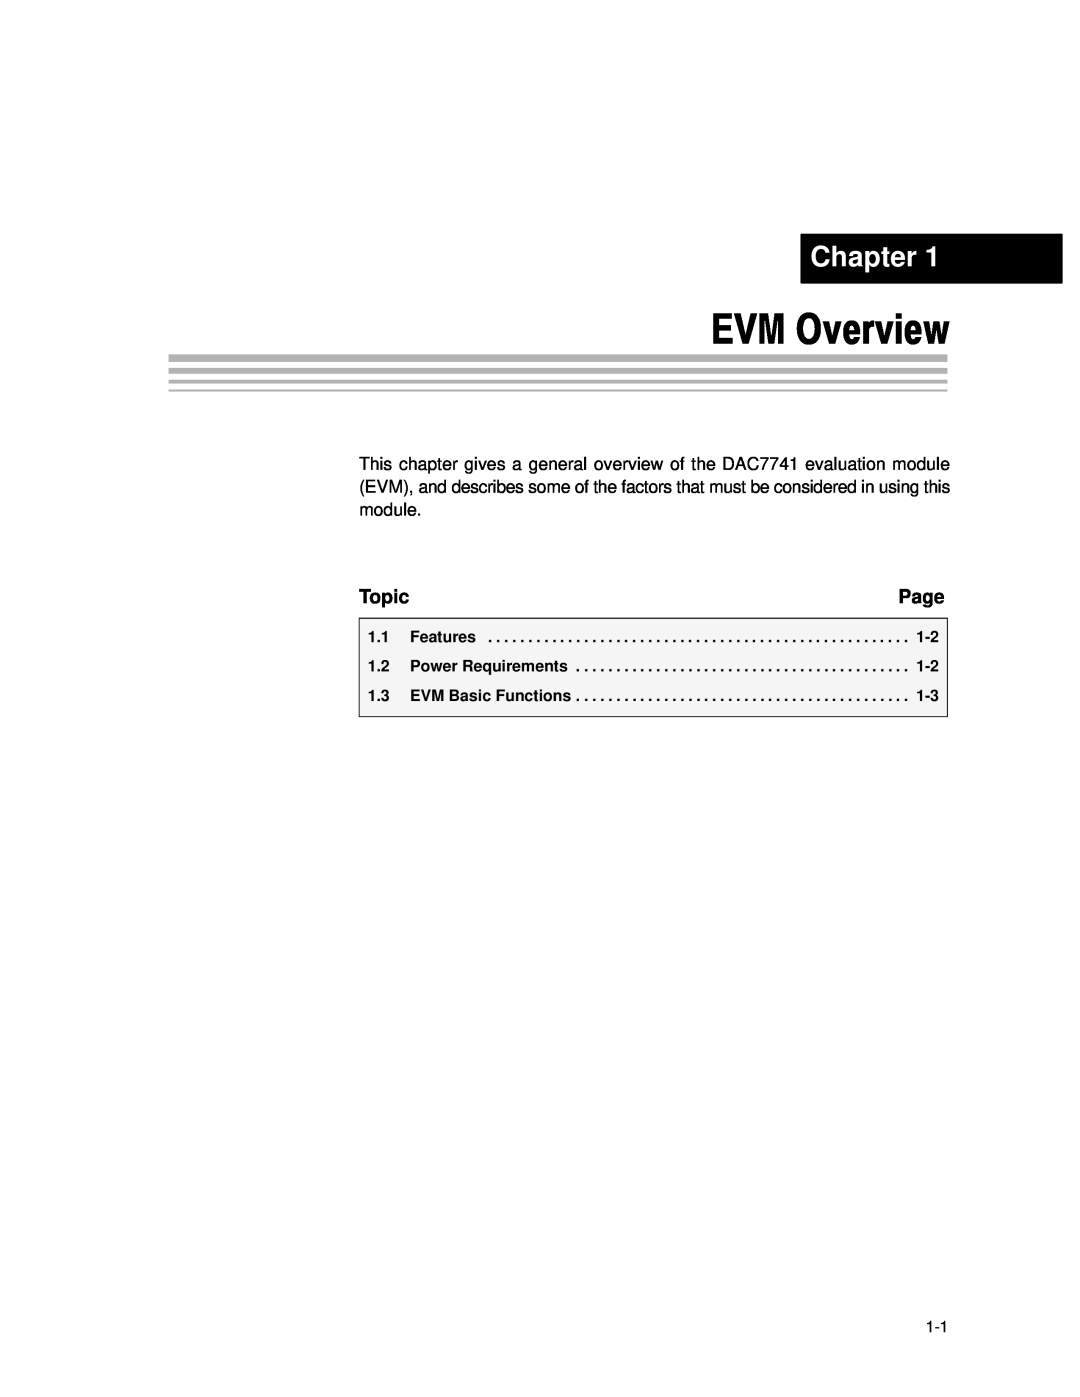 Texas Instruments DAC7741EVM manual EVM Overview, Chapter, Page, Topic, Features, Power Requirements, EVM Basic Functions 